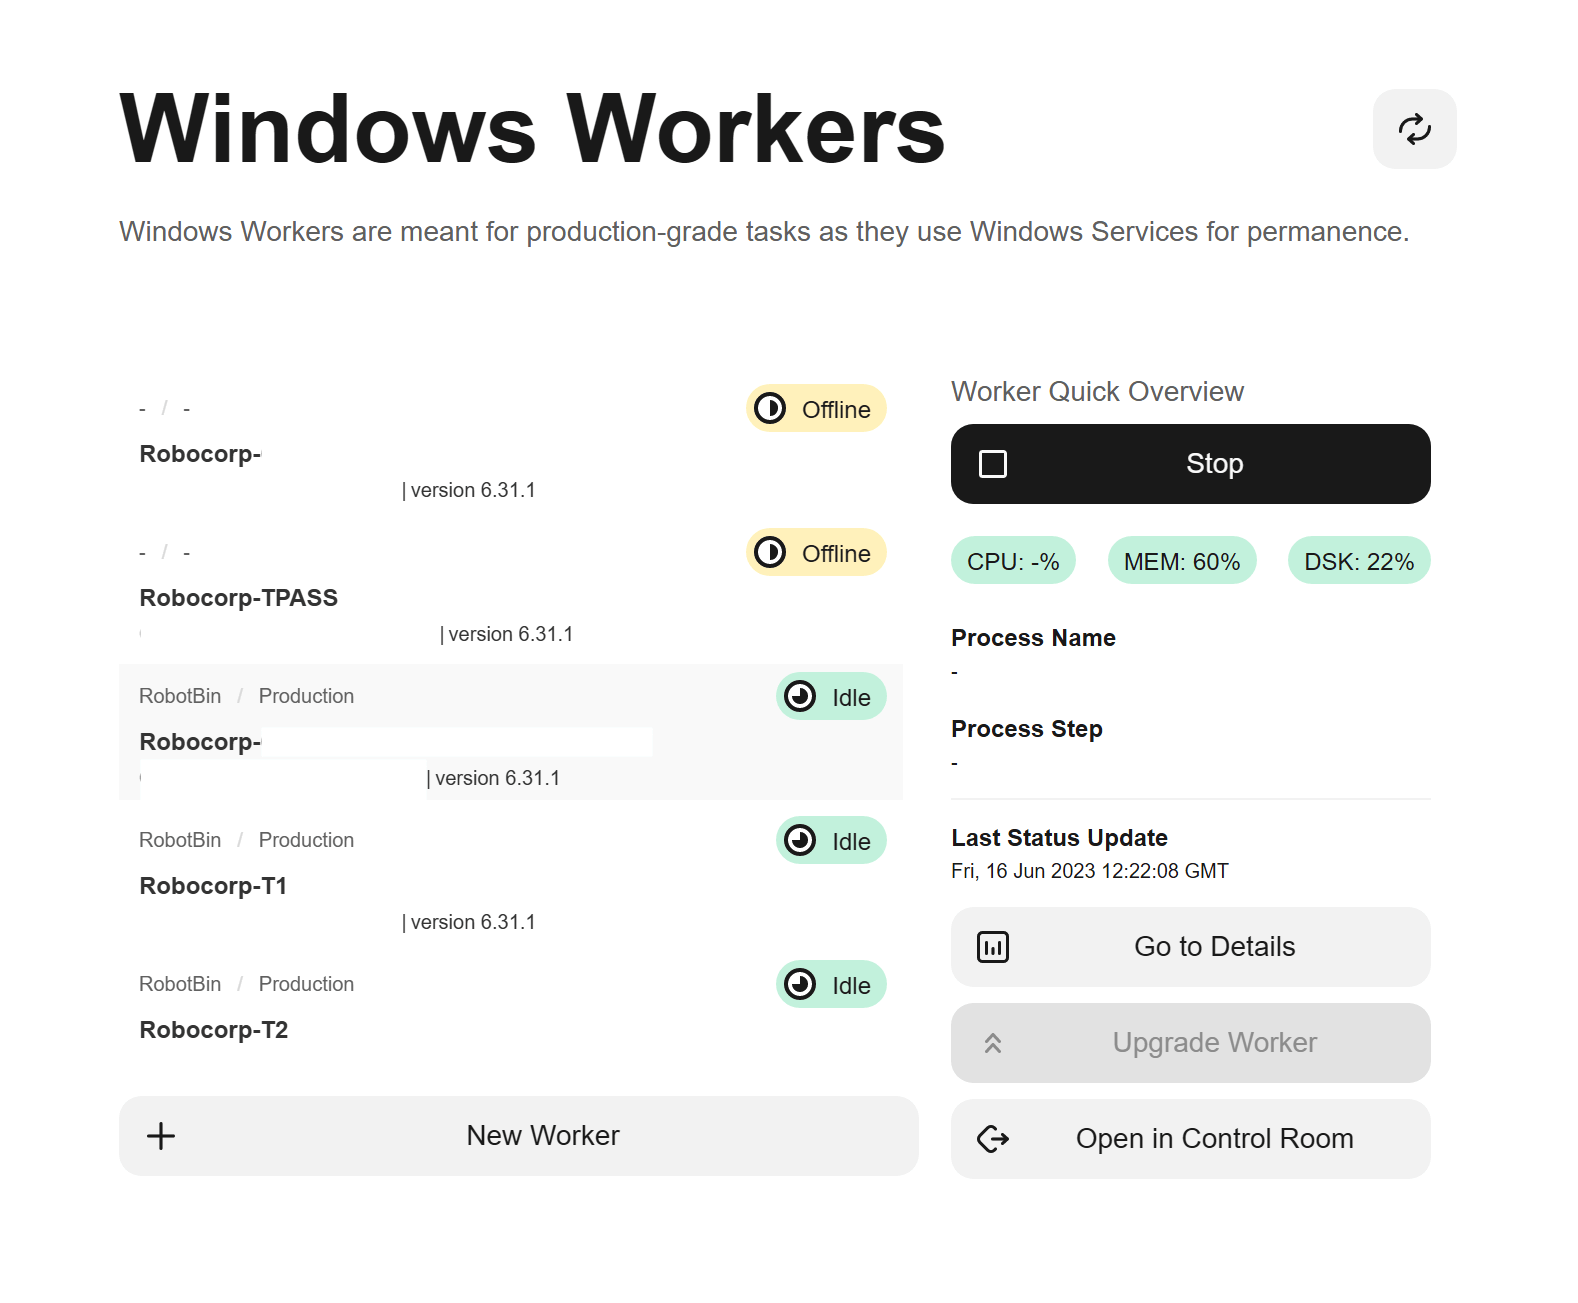 Windows Workers Management